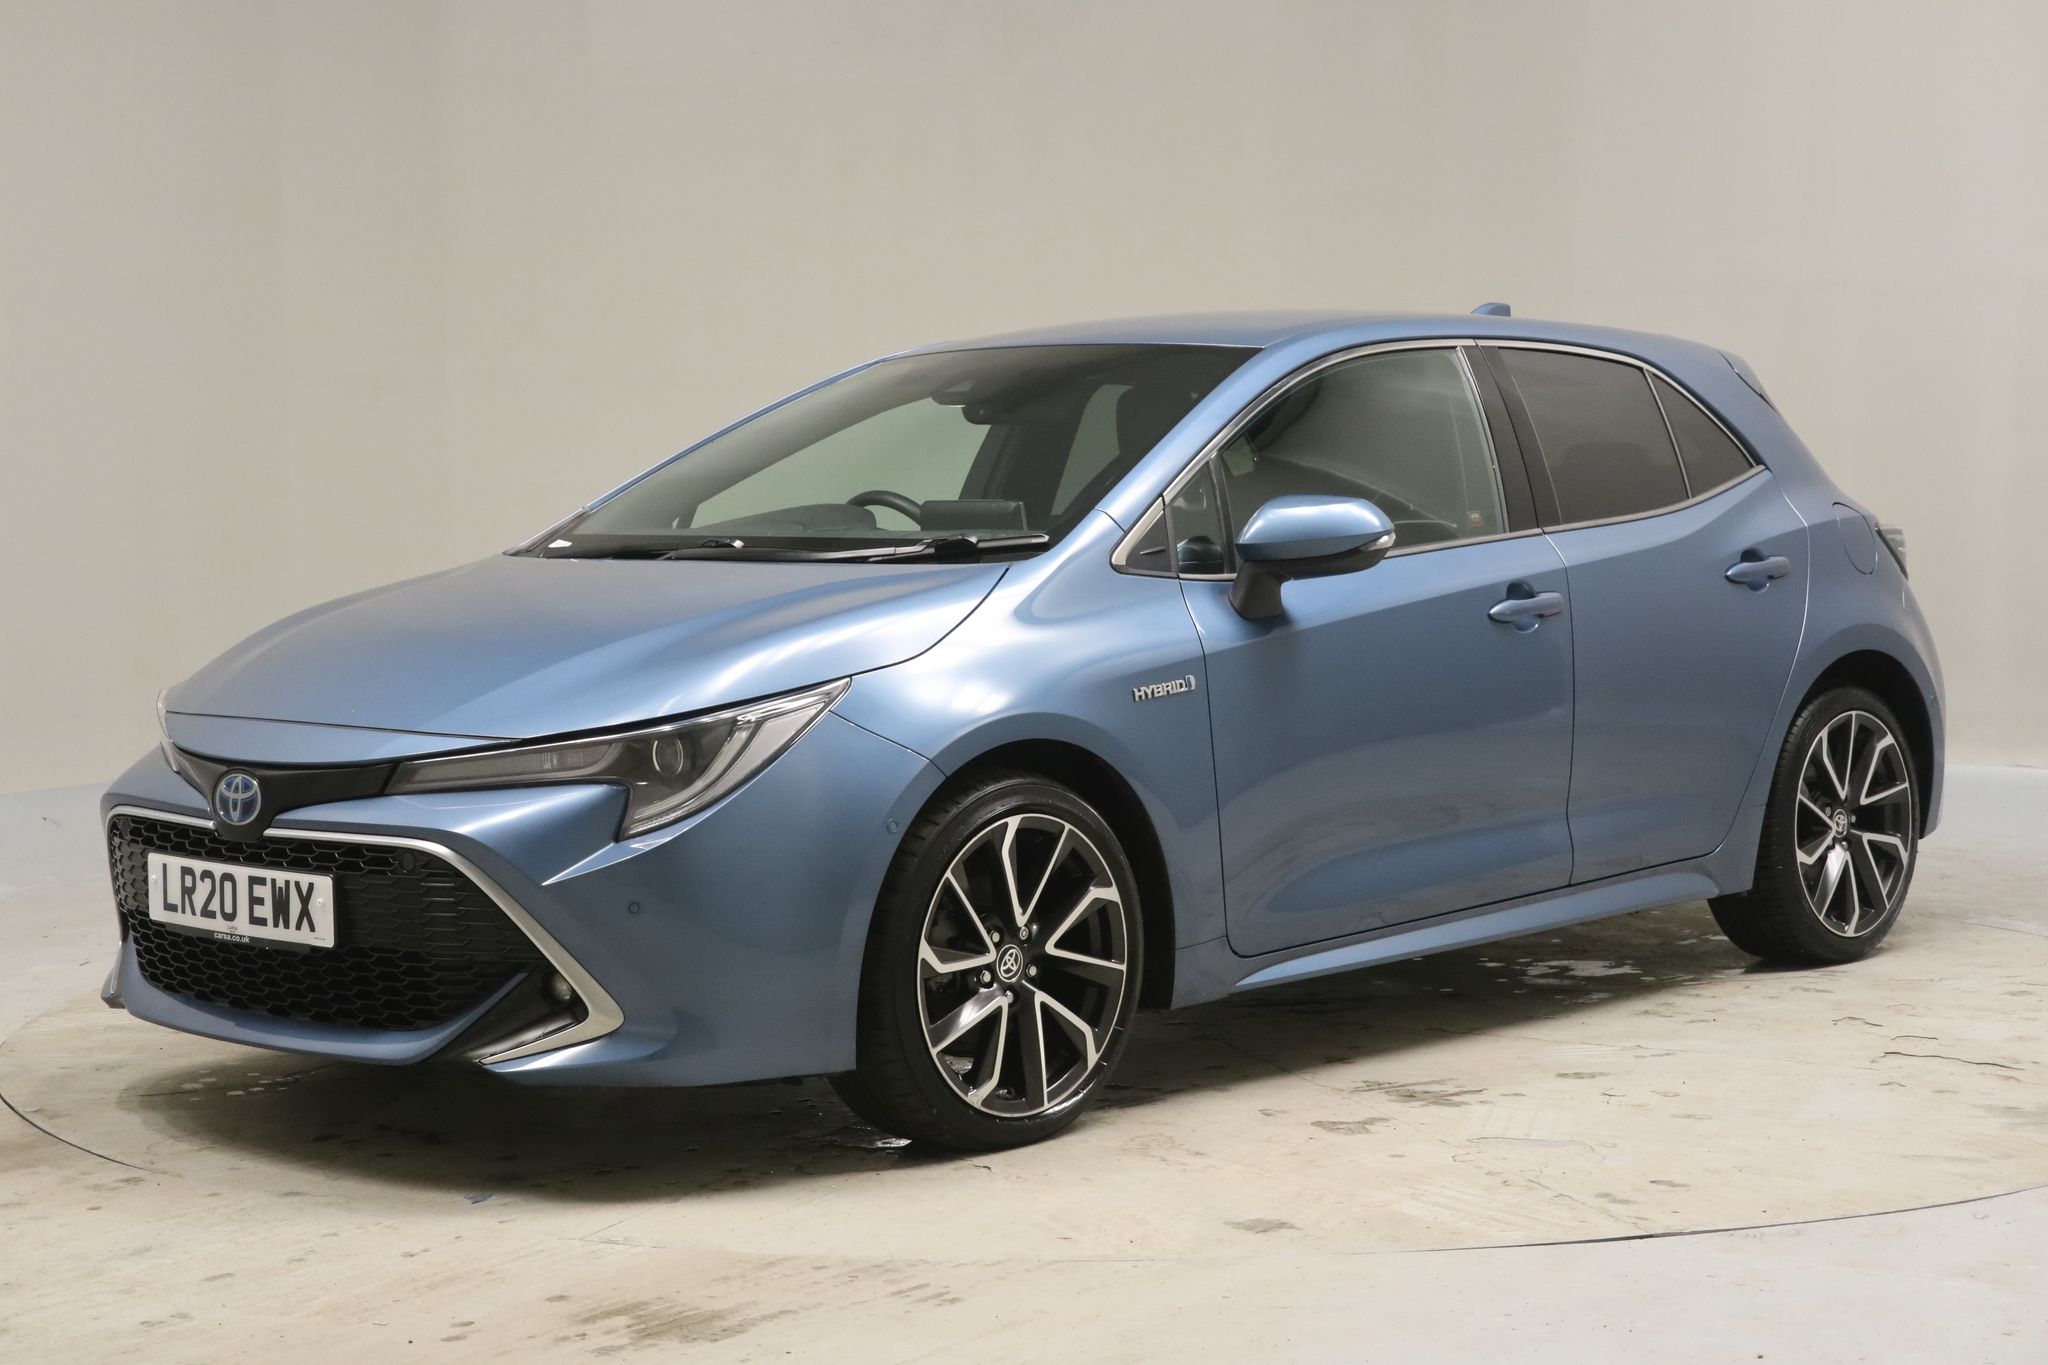 2020 used Toyota Corolla 1.8 VVT-h Excel CVT (122 ps)